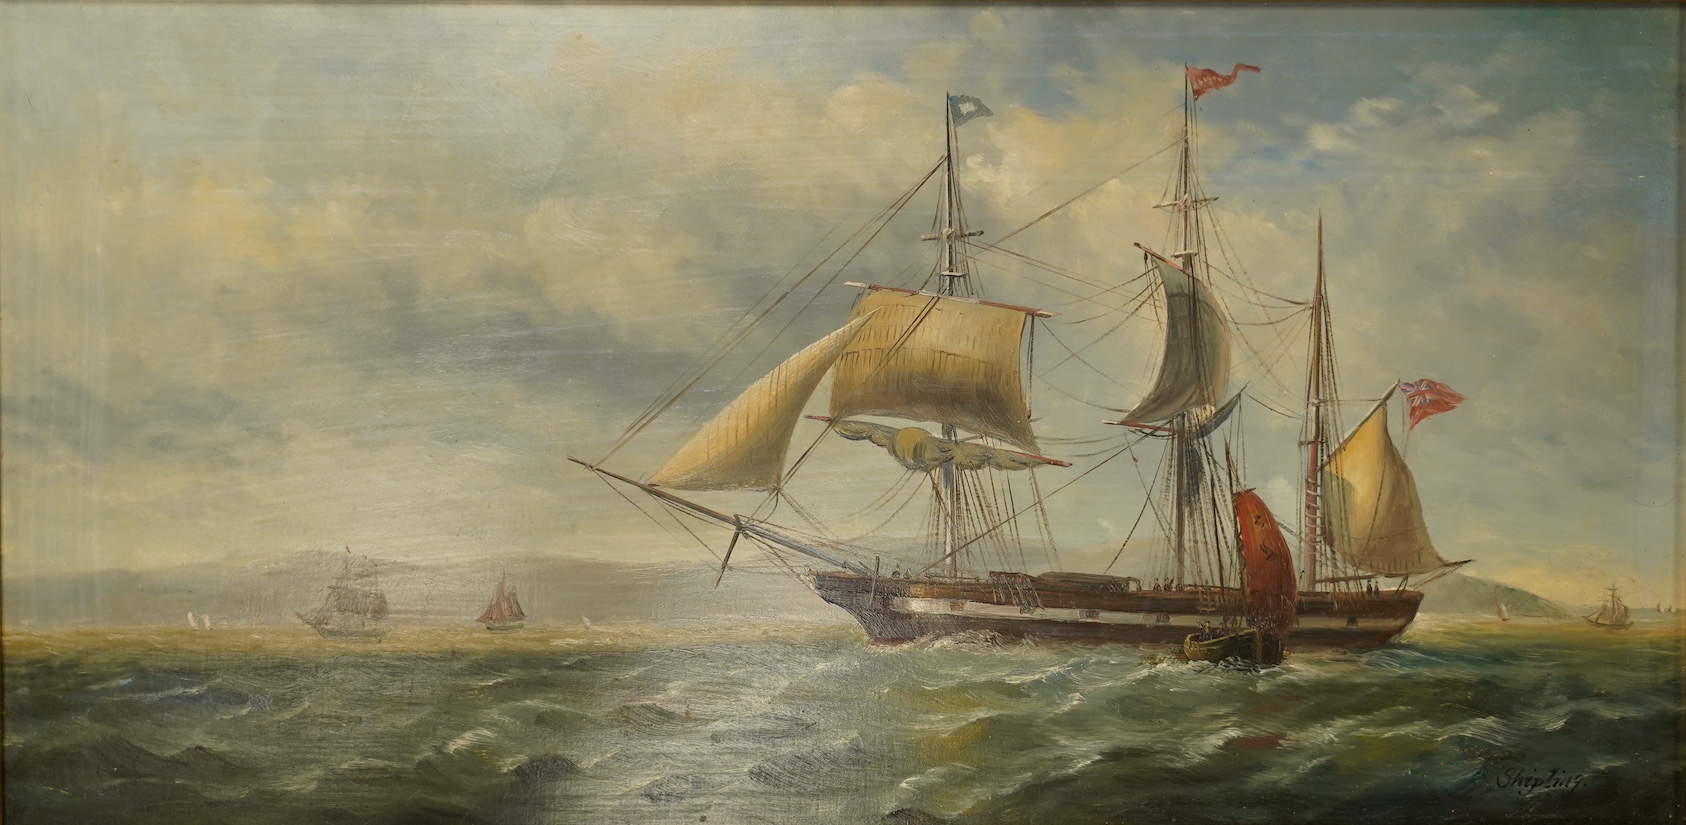 Shipling, oil on board, British naval ships before a coastline, signed, 19 x 39cm, gilt framed. Condition - fair, losses to the frame